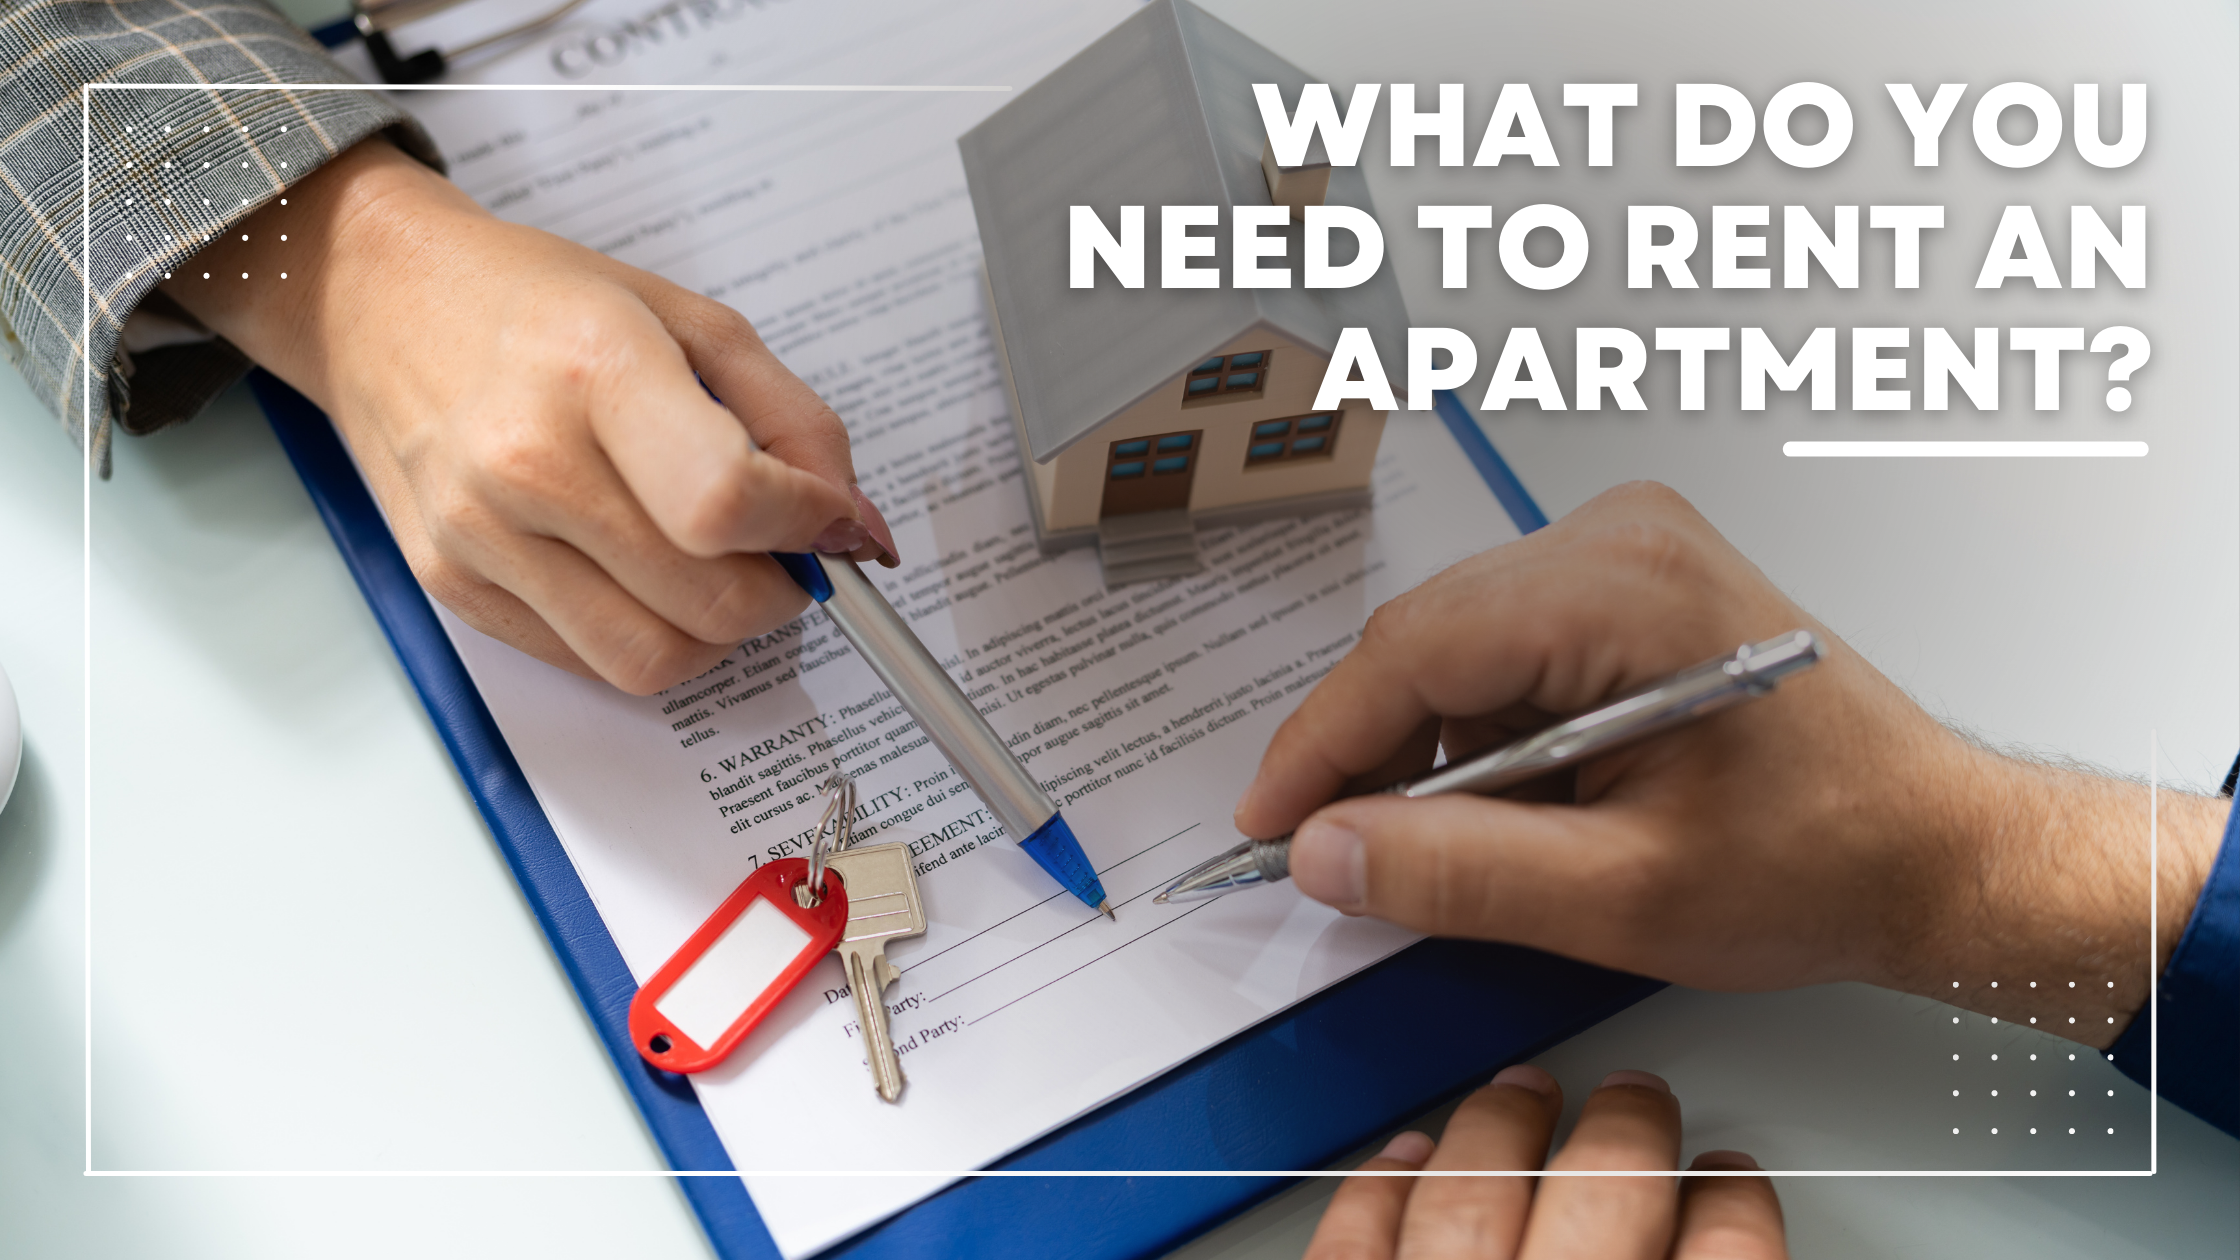 What Do You Need to Rent an Apartment?